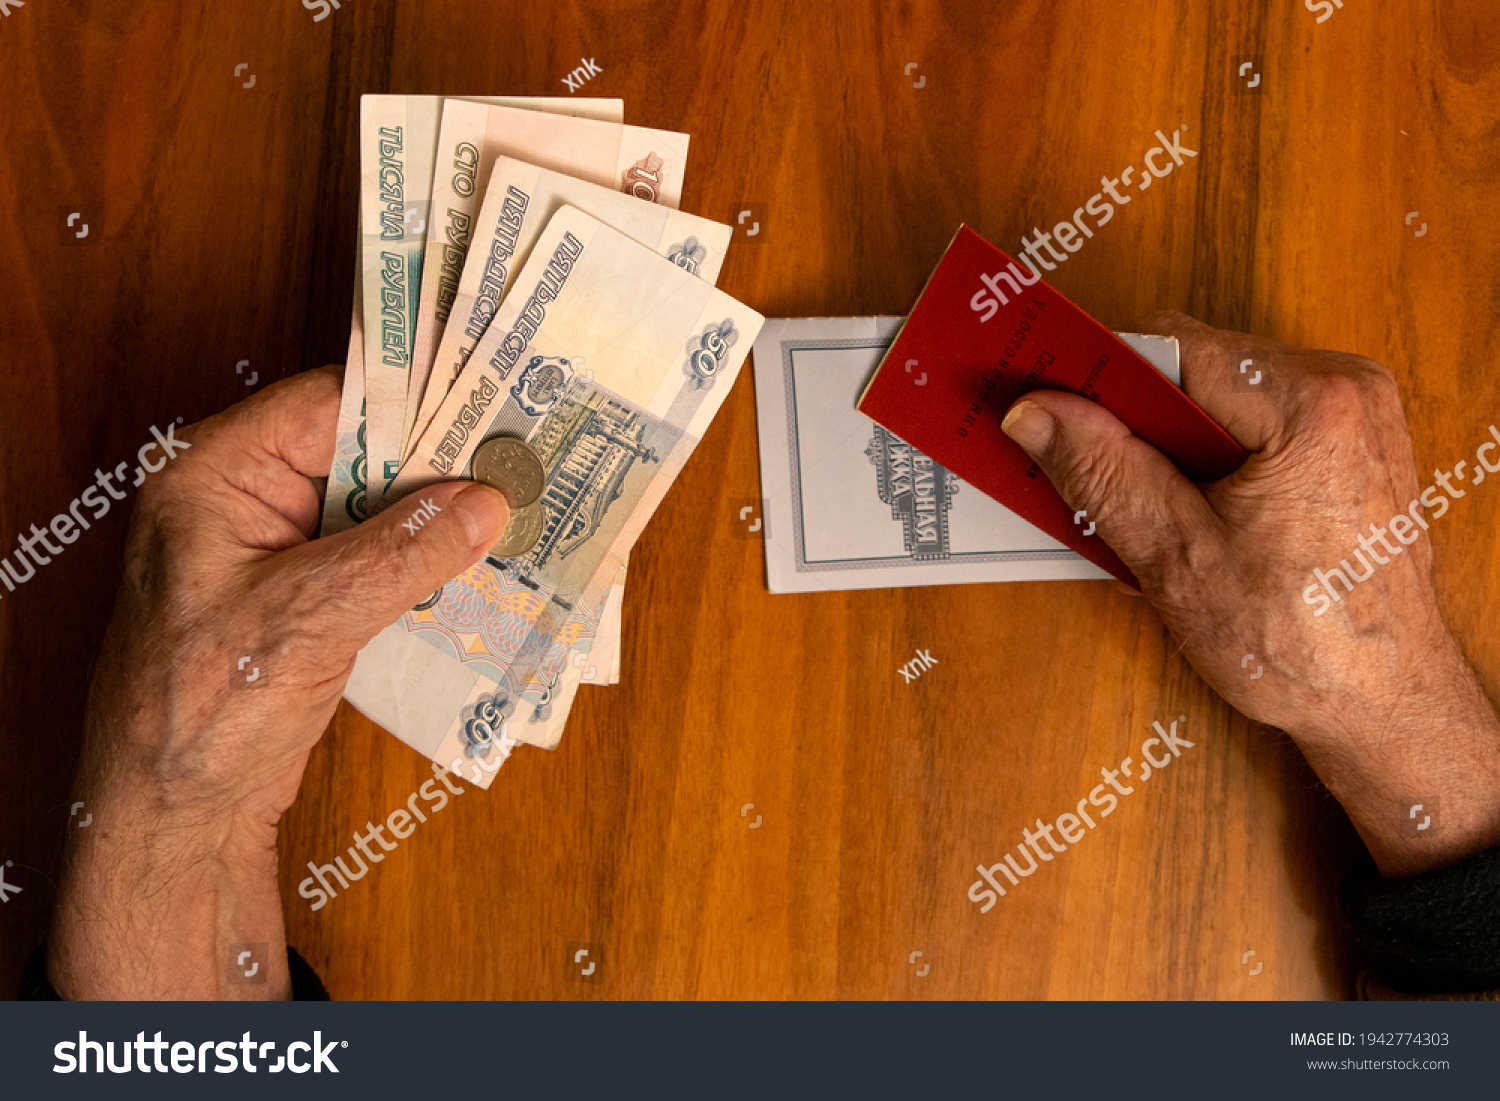 Elderly man holding russian ruble banknotes in one hand and pension certificate with passbook
in another. The concept of pension, payment and money savings. #1942774303